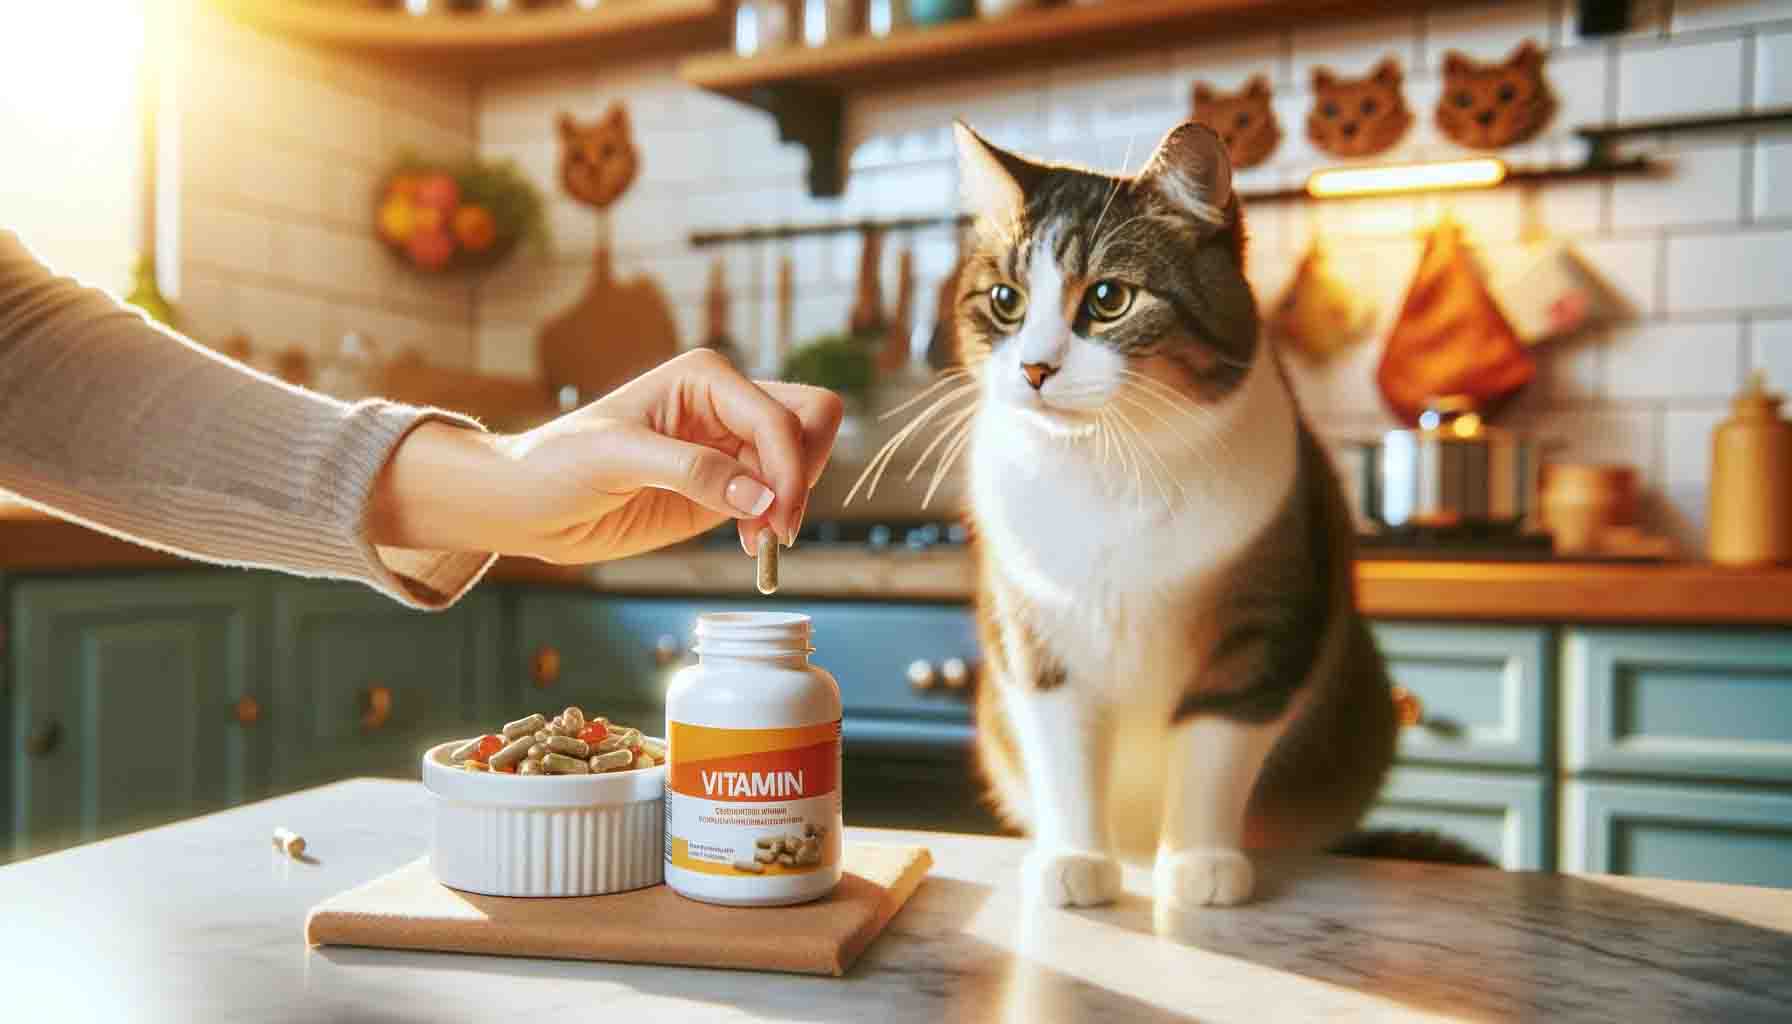 How to Add Vitamins to Your Cat's Food